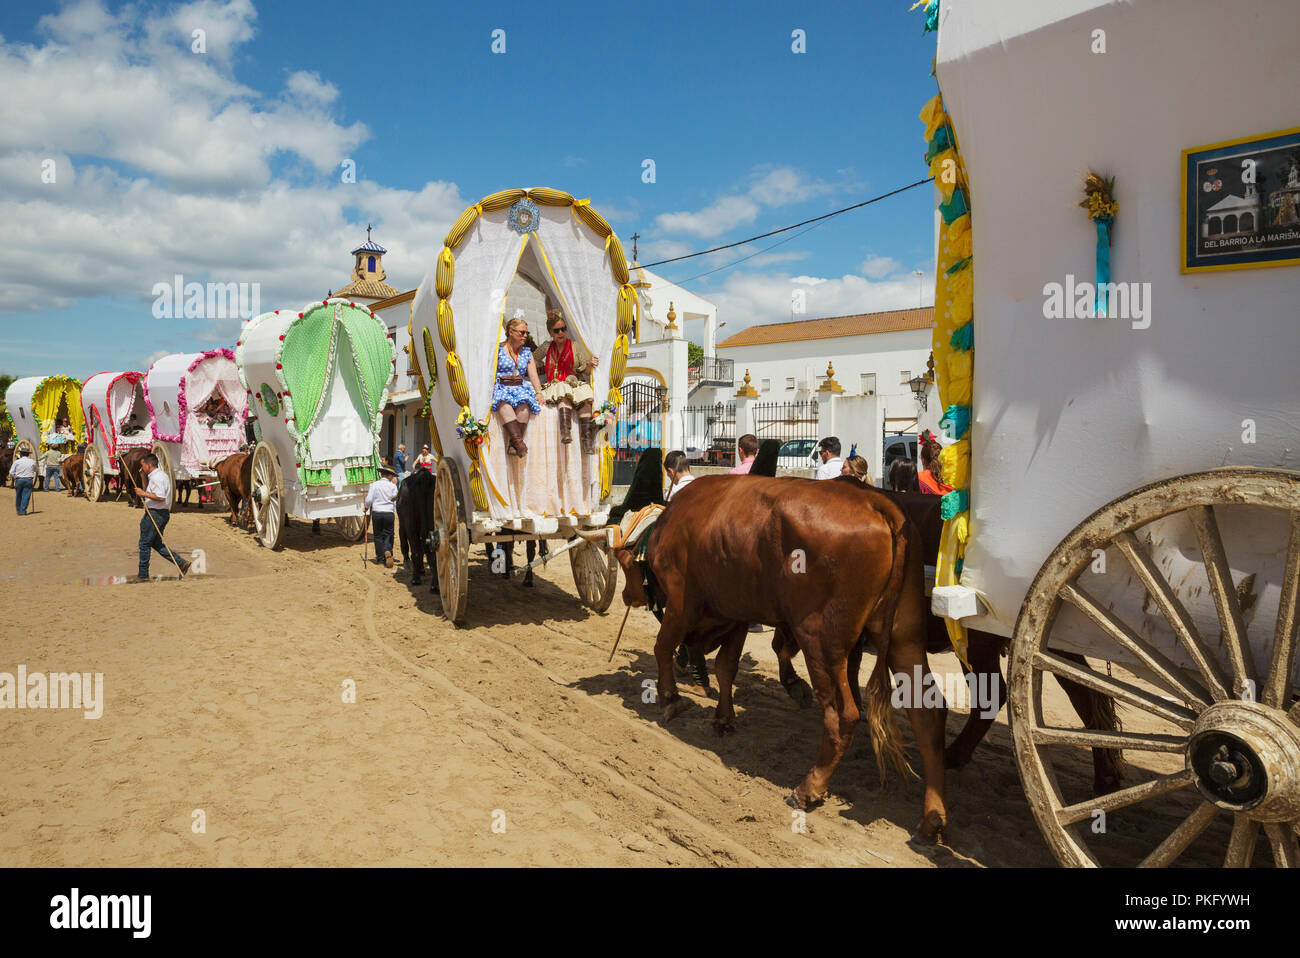 Decorated oxcarts, people in traditional clothes, Pentecost pilgrimage of El Rocio, Huelva province, Andalusia, Spain Stock Photo